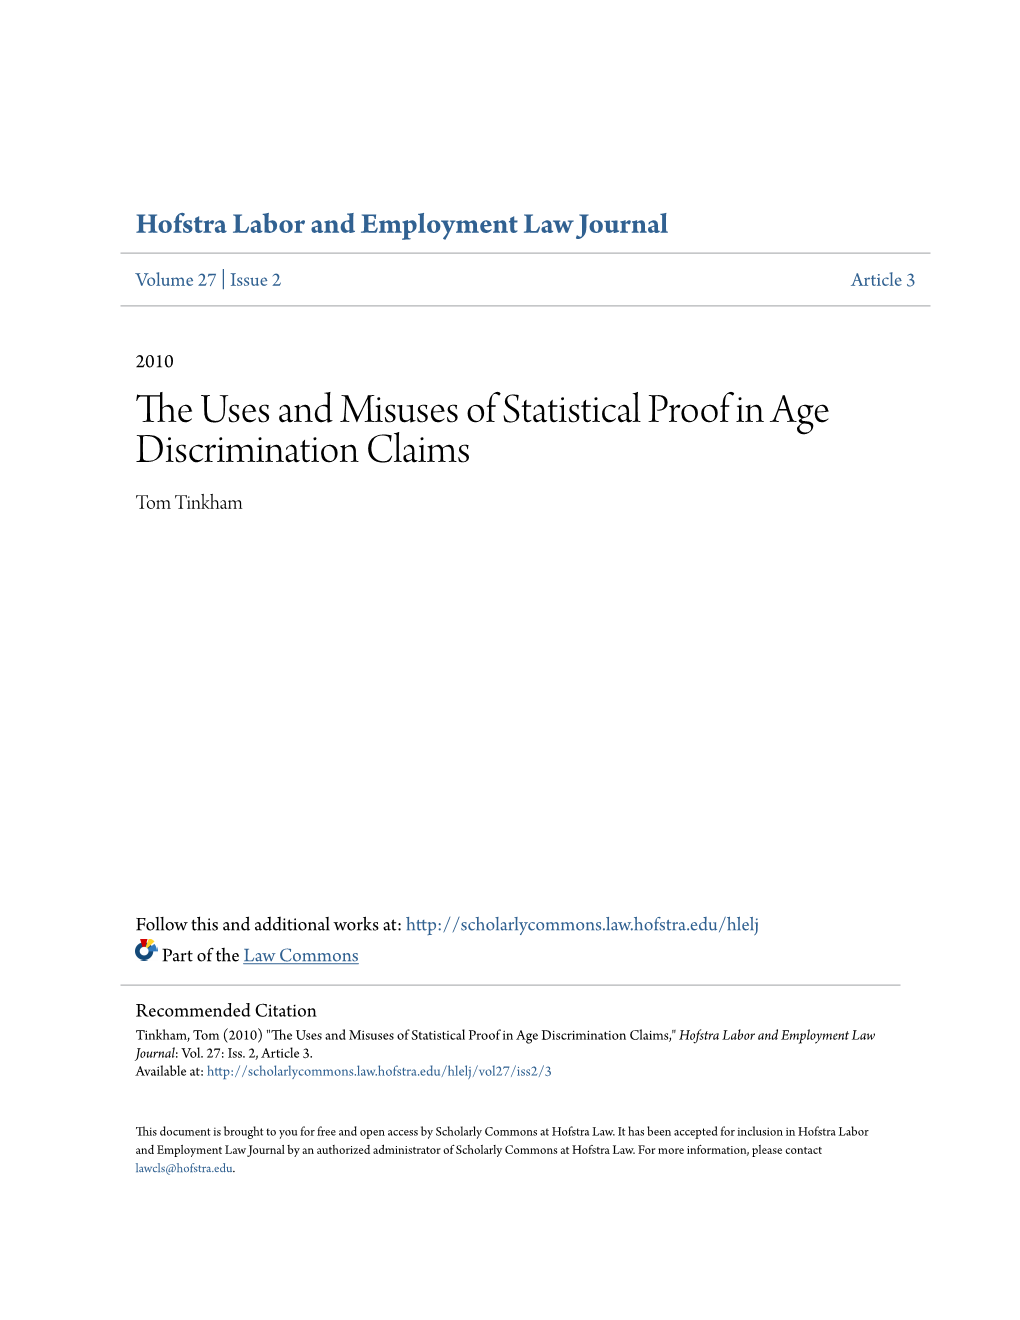 The Uses and Misuses of Statistical Proof in Age Discrimination Claims